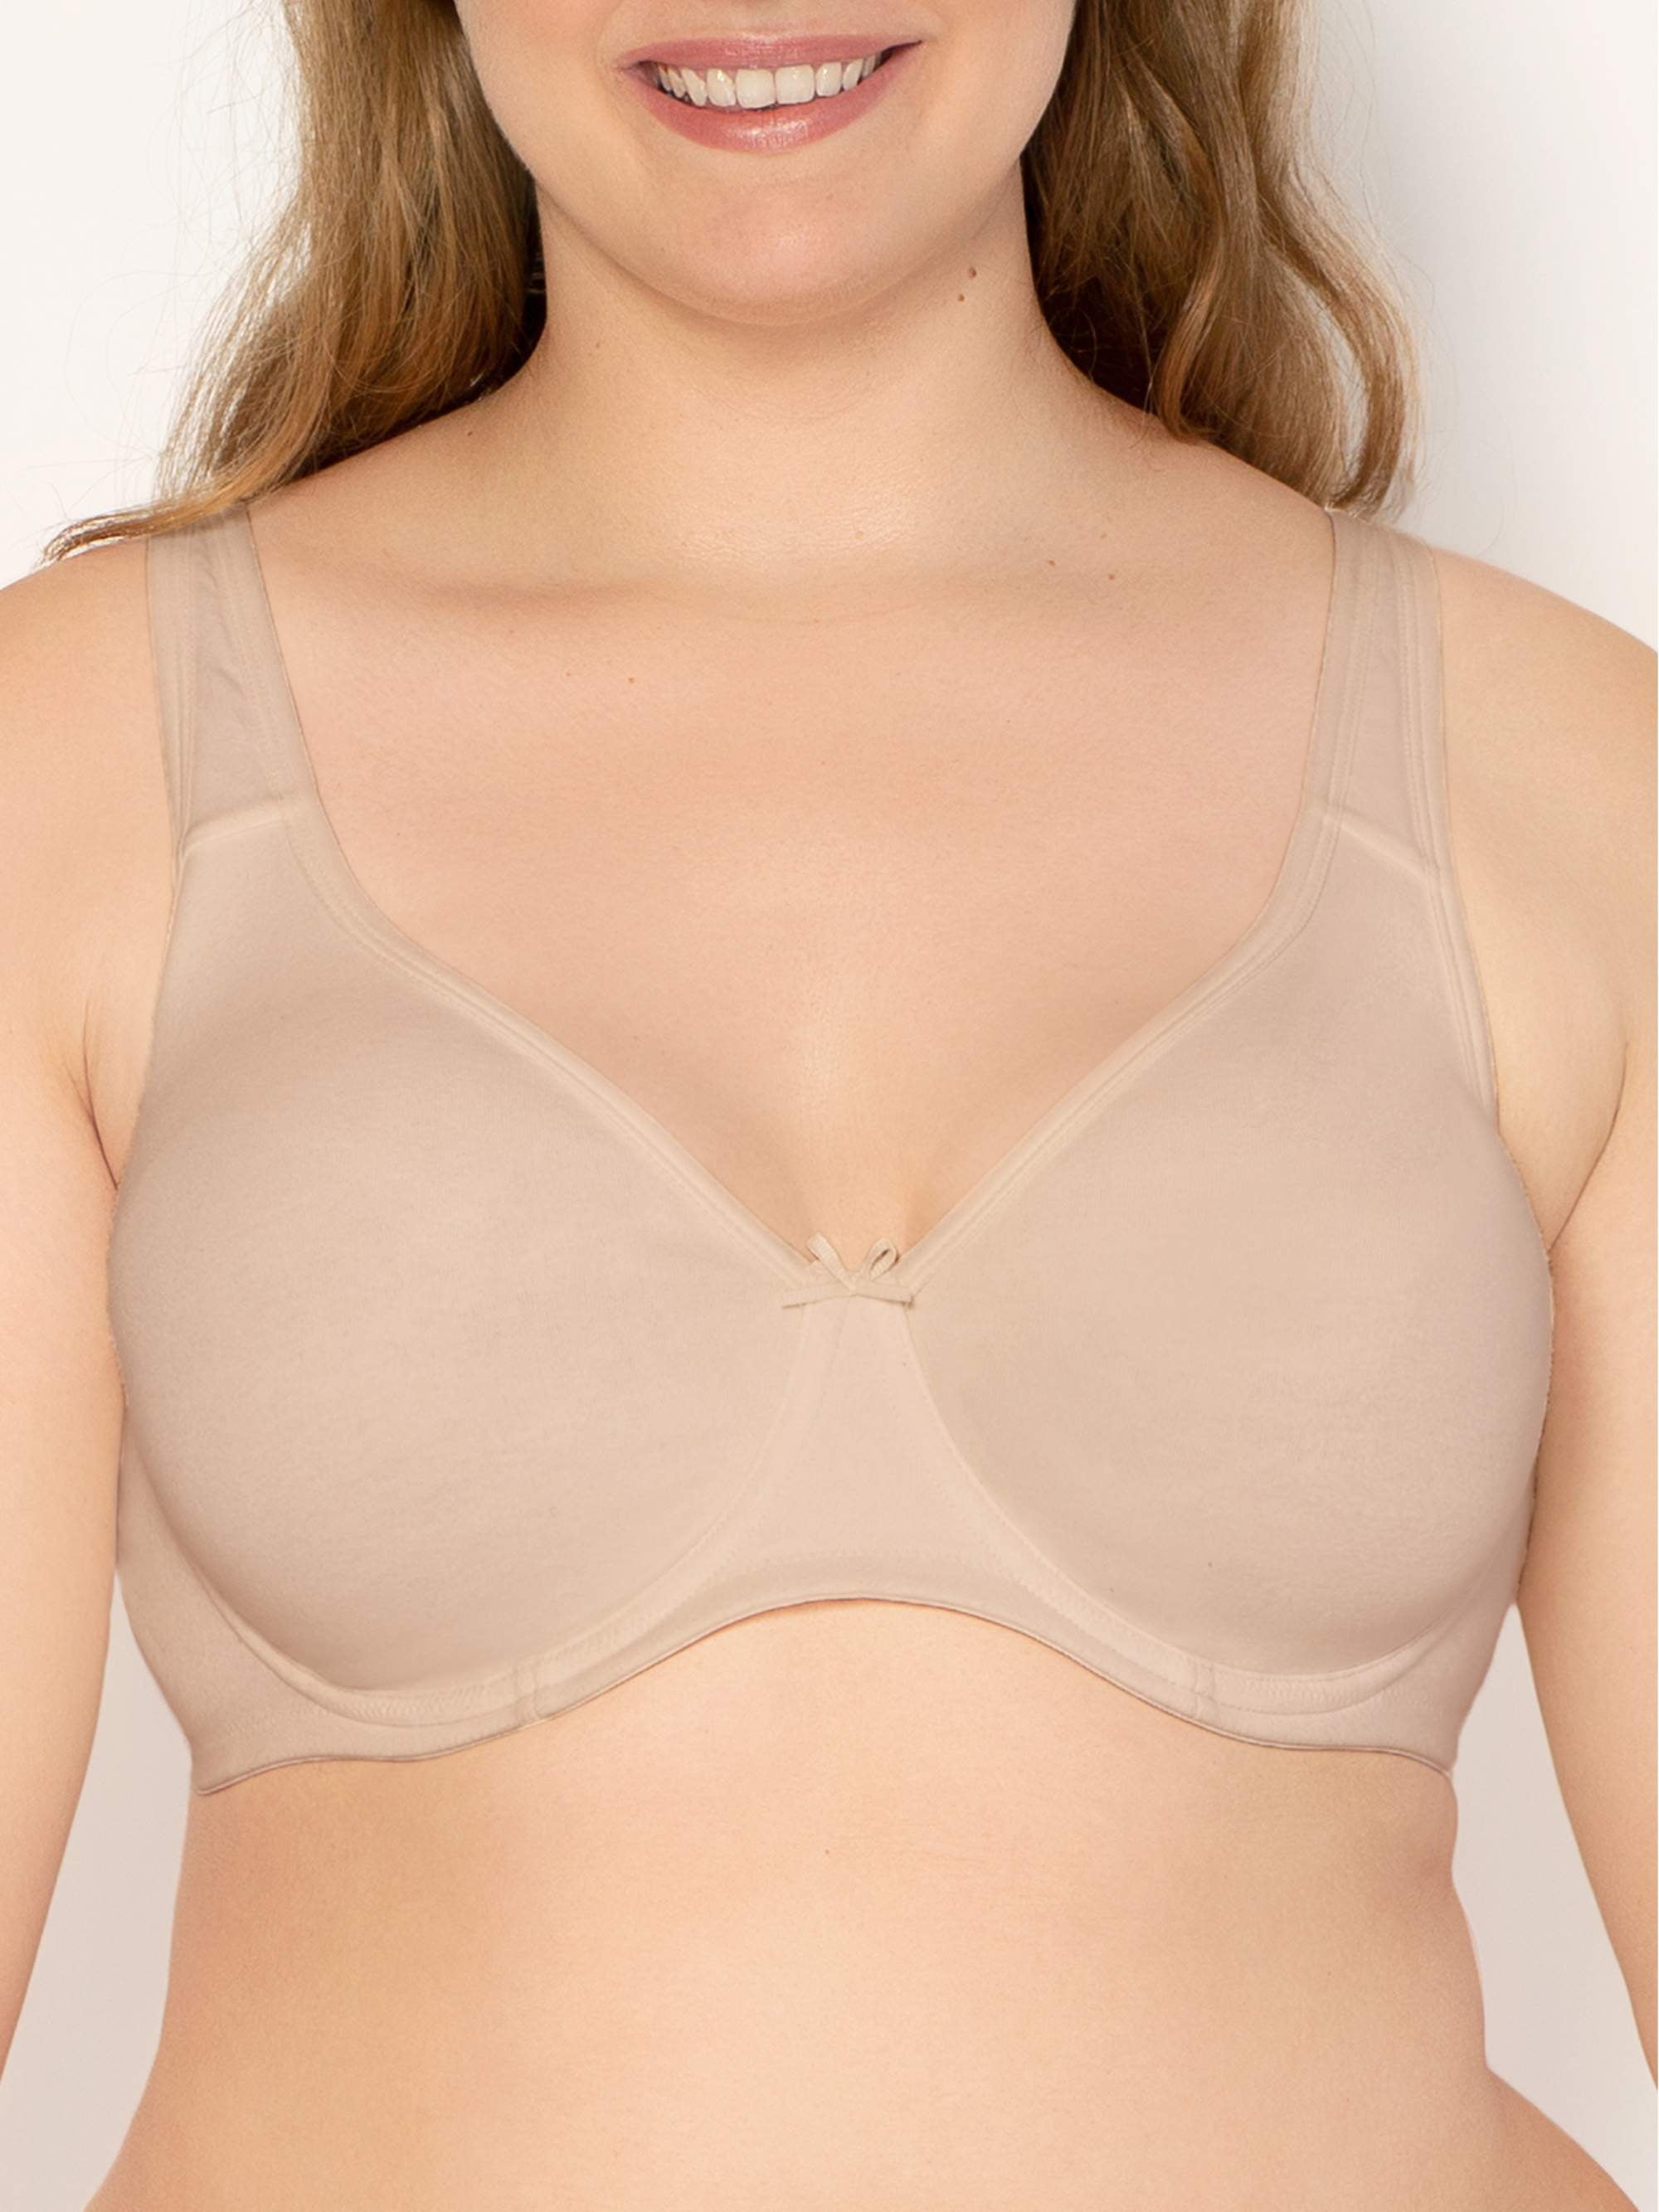 Fruit of the Loom Women's Plus Size Beyond Soft Cotton Unlined Underwire Bra,  Style FT813 